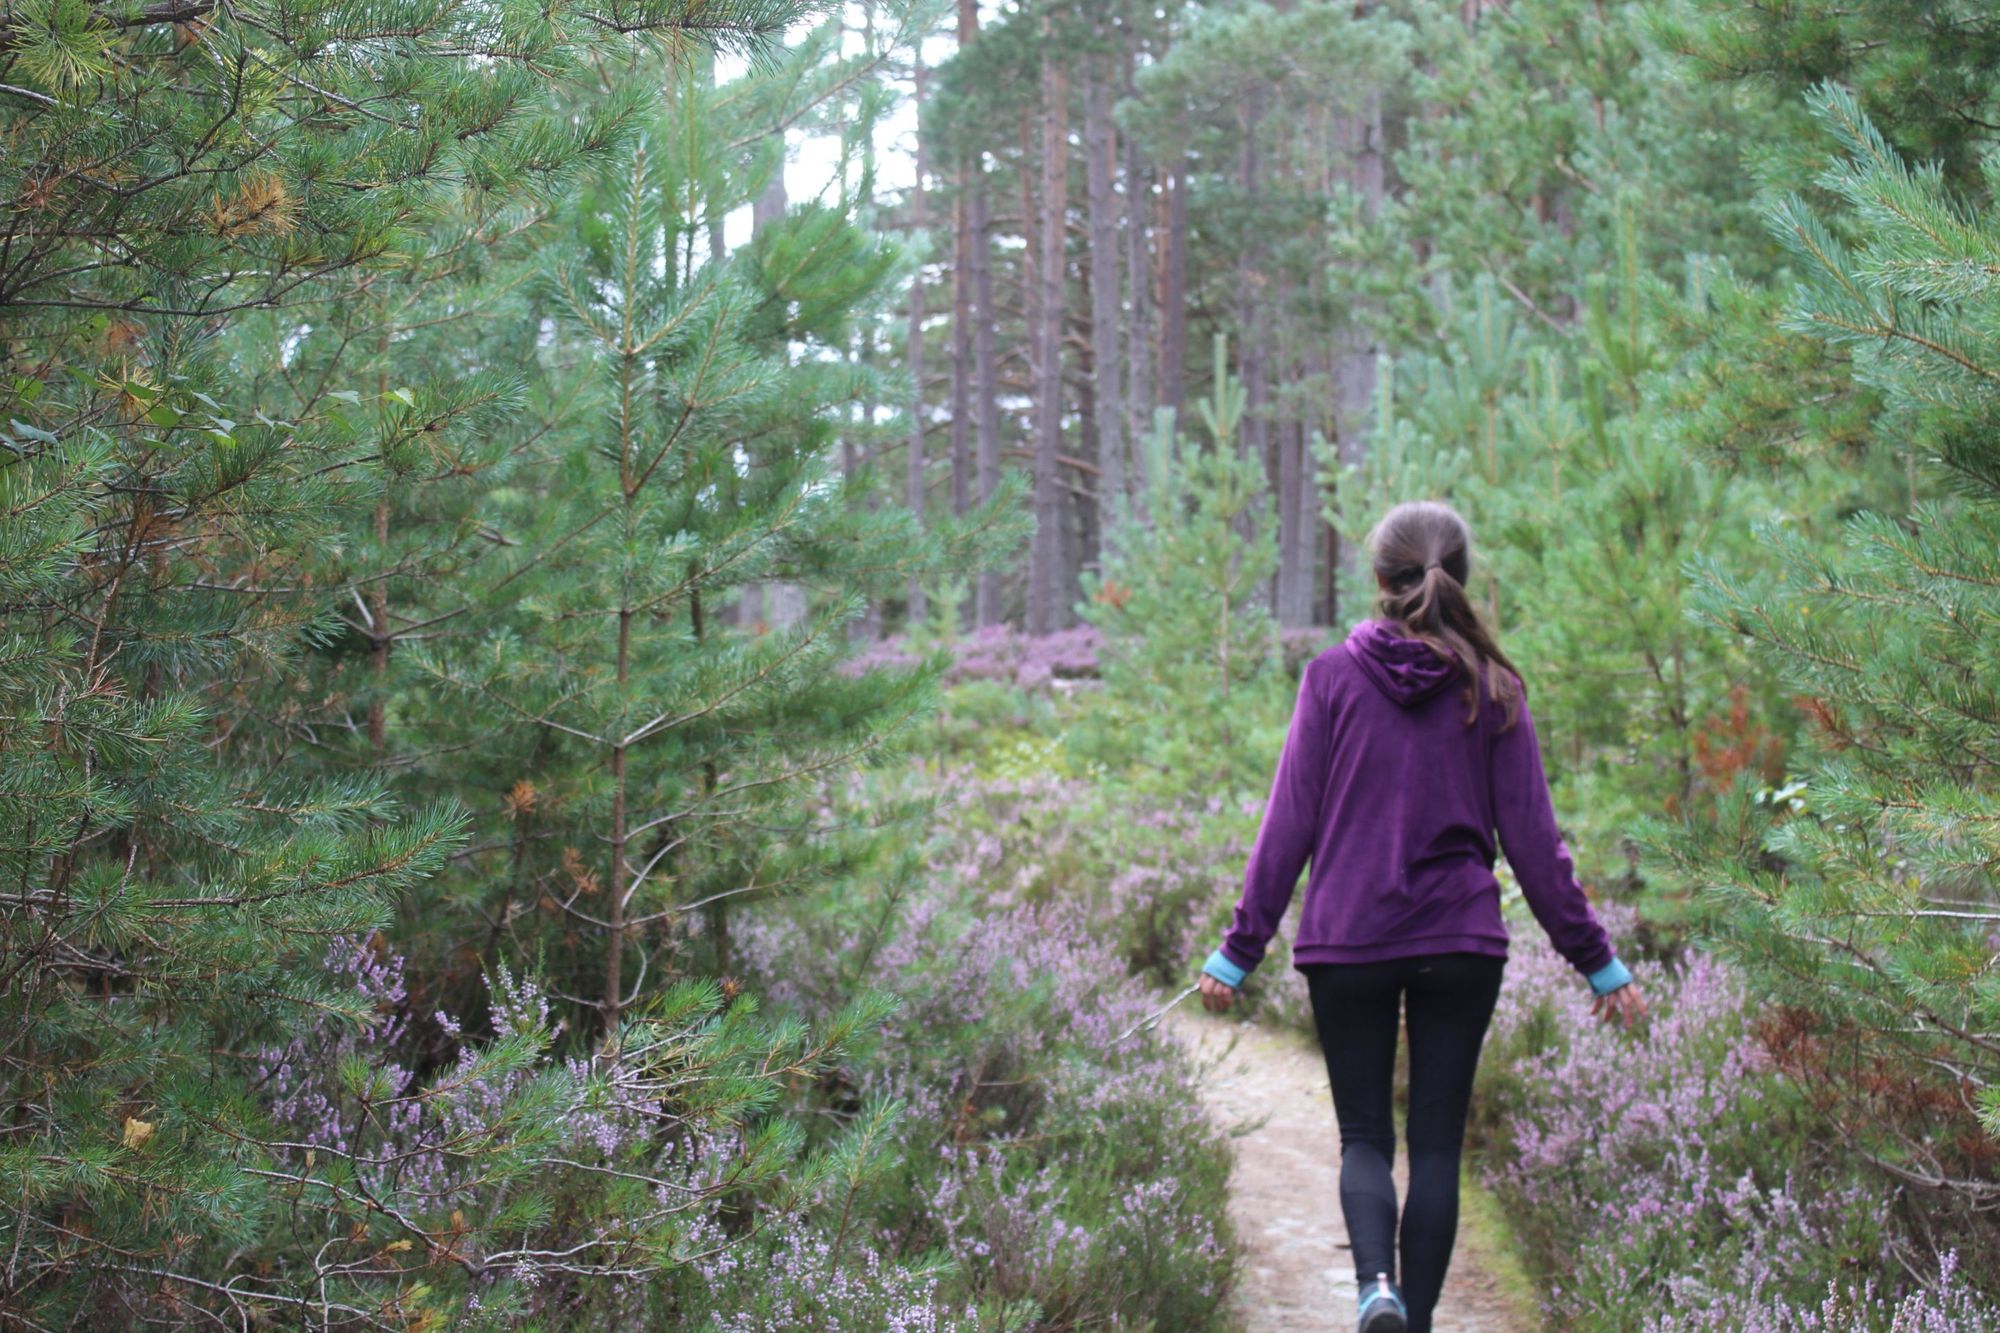 A woman hiker on the Uath Lochans trail in the Cairngorms, seen from behind.